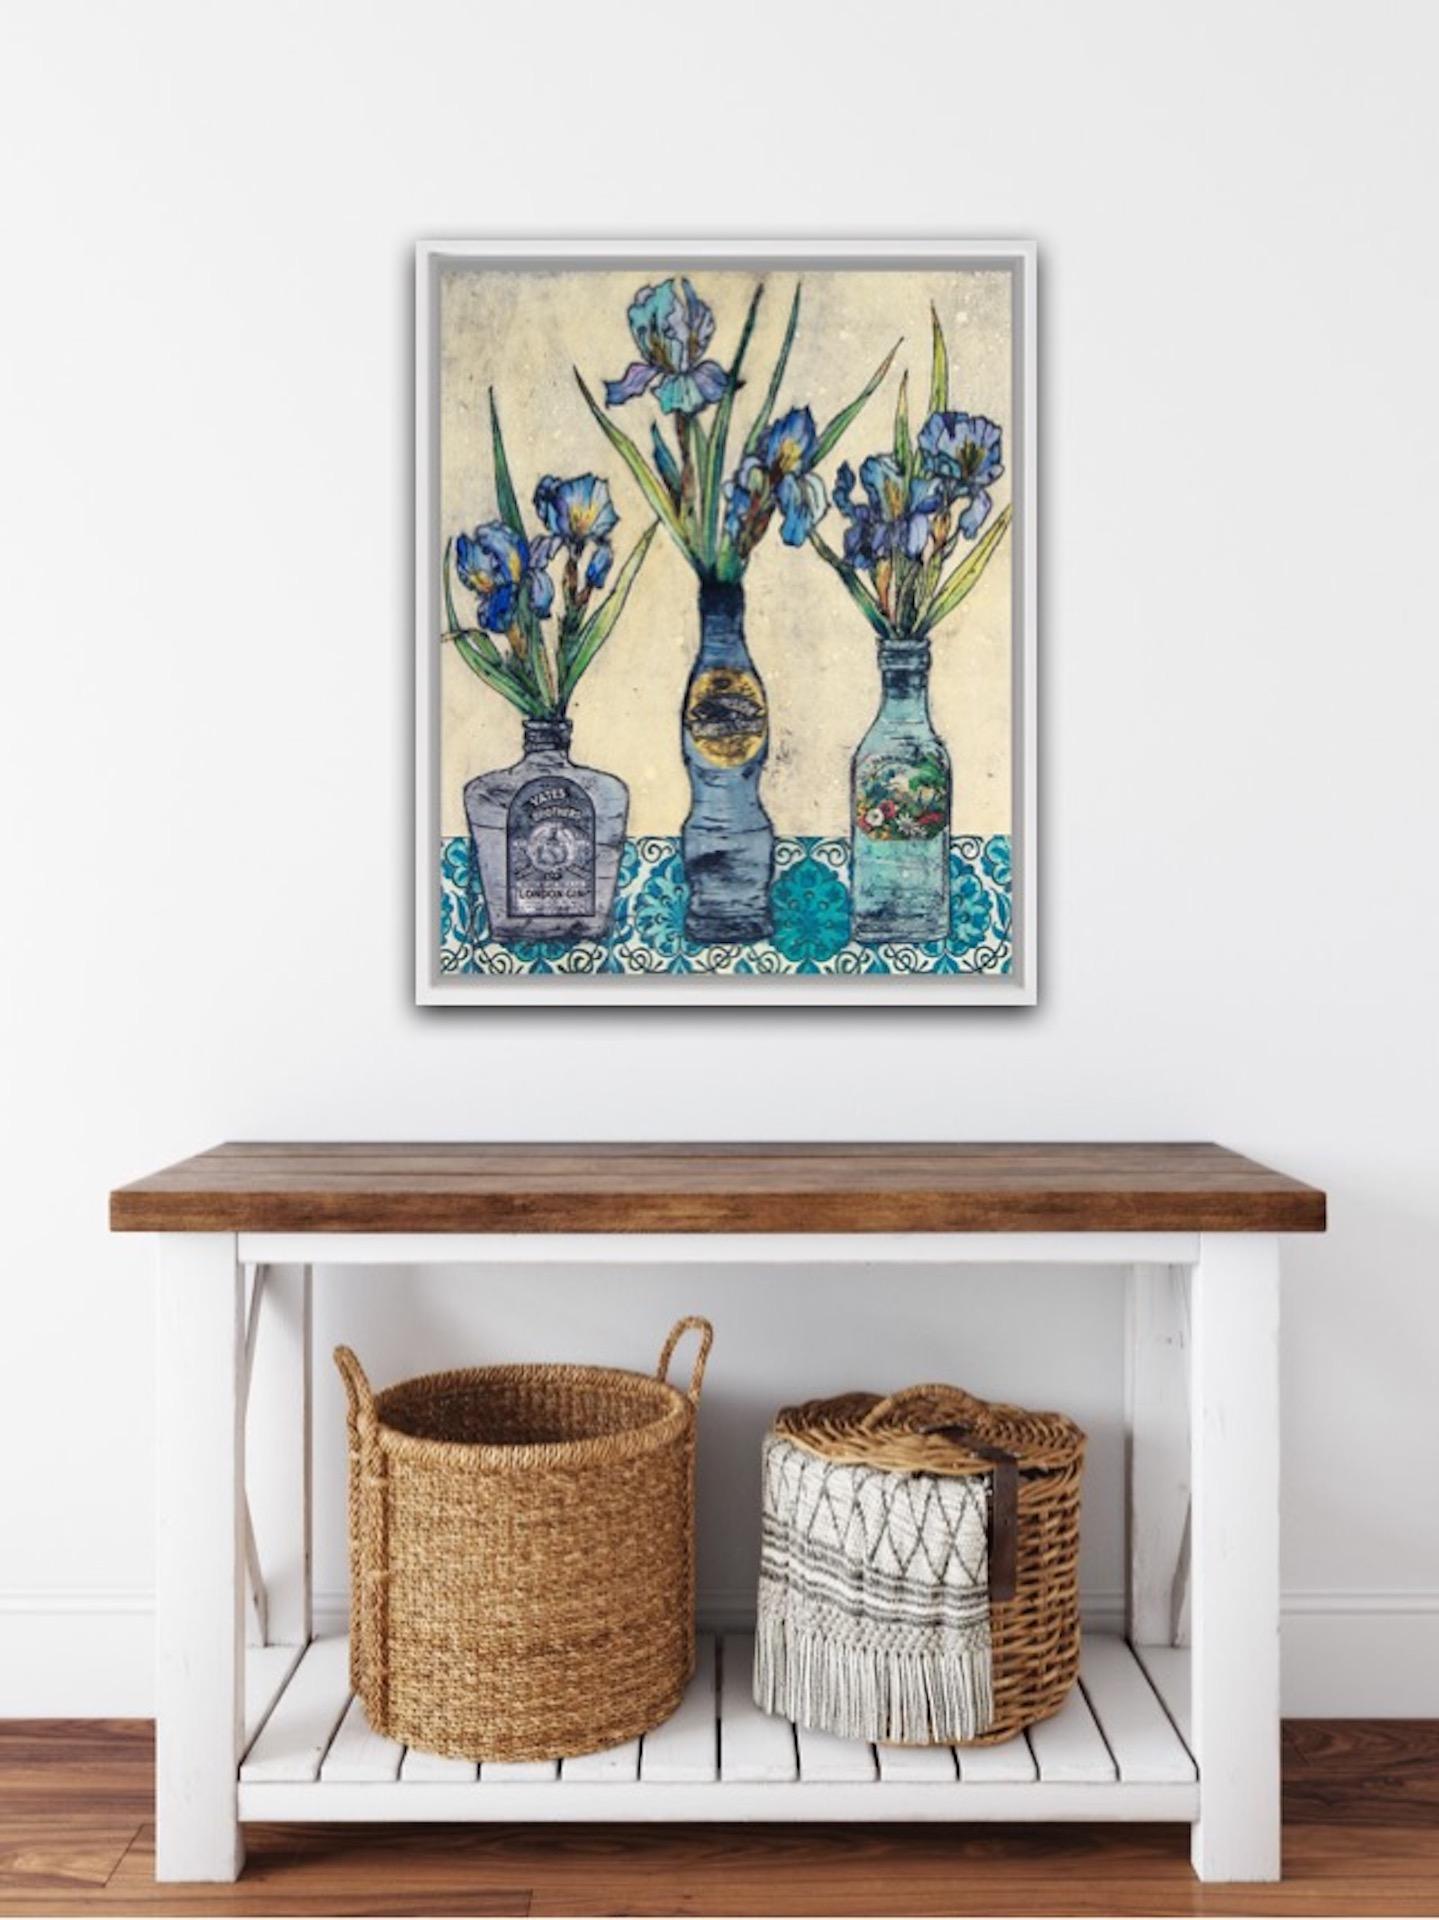 Vicky Oldfield
Cool Blues
Limited Edition Collagraph Print
Edition of 30
Image Size: H 49cm x W 40cm
Sheet Size: H 64cm x W 54cm x D 0.1cm
Sold Unframed
Please note that insitu images are purely an indication of how a piece may look.

Cool Blues is